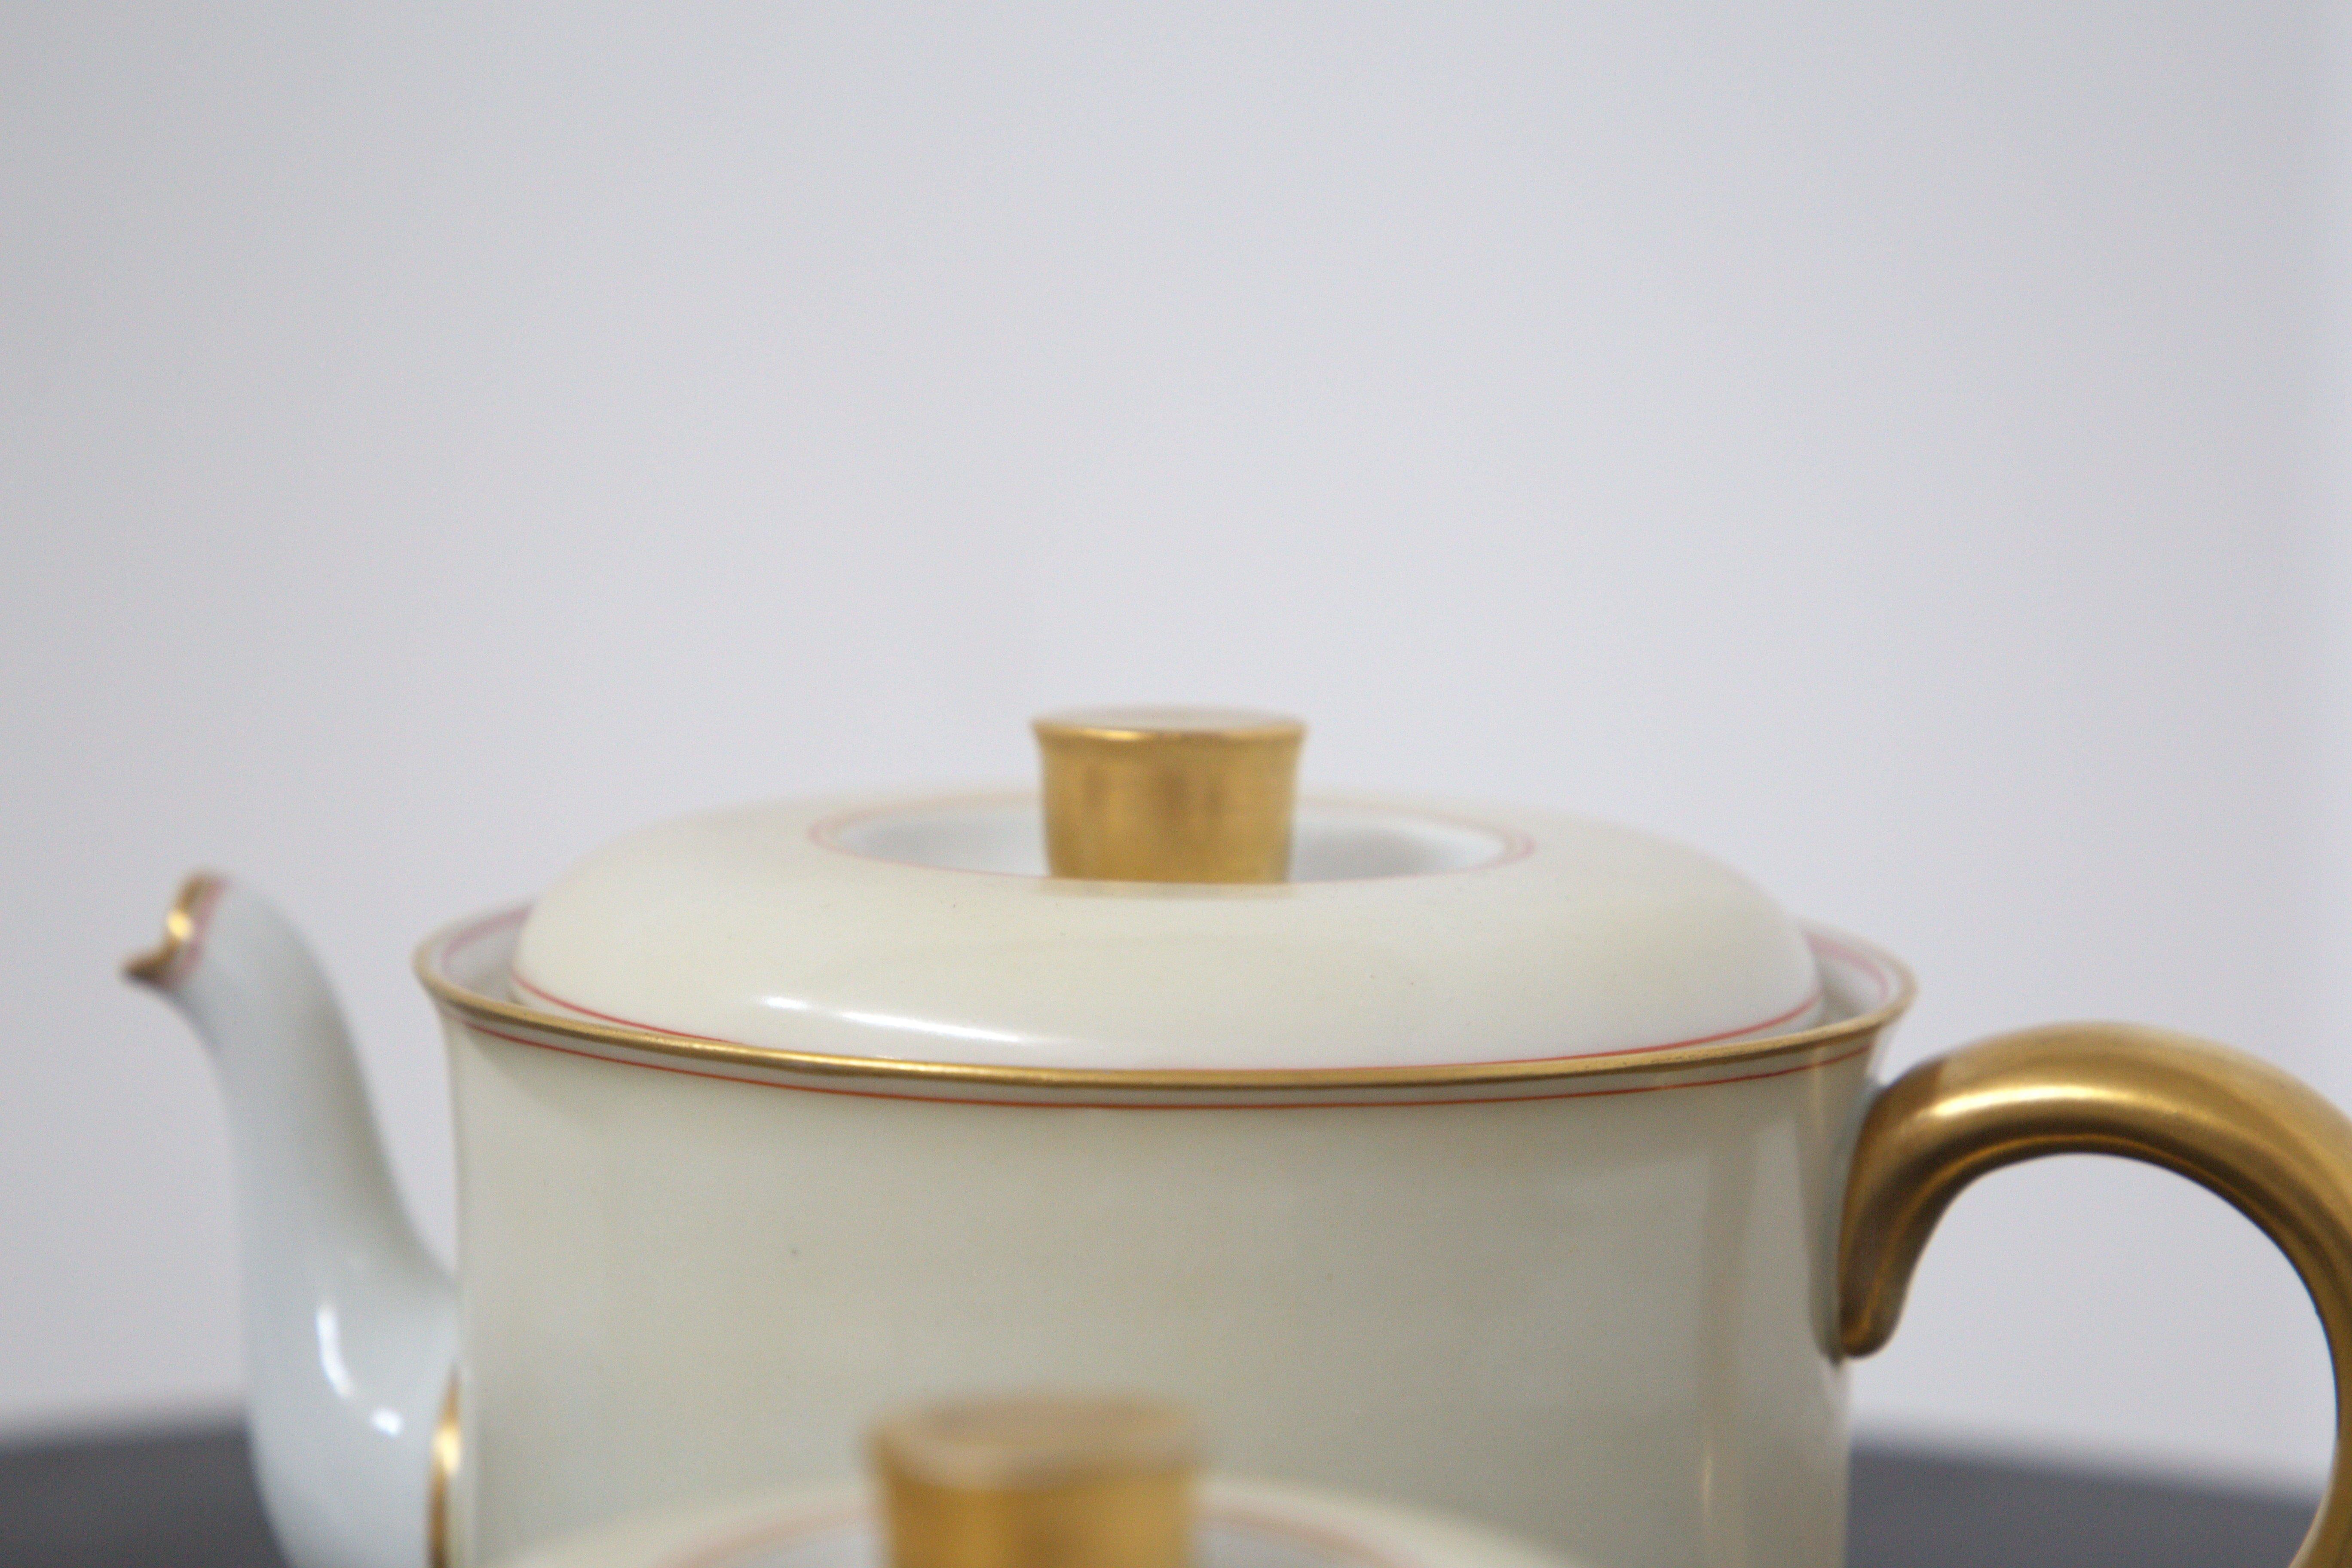 Mid-Century Modern Tea Set in Ceramic and Pure Gold by Gio Ponti for Richard Ginori